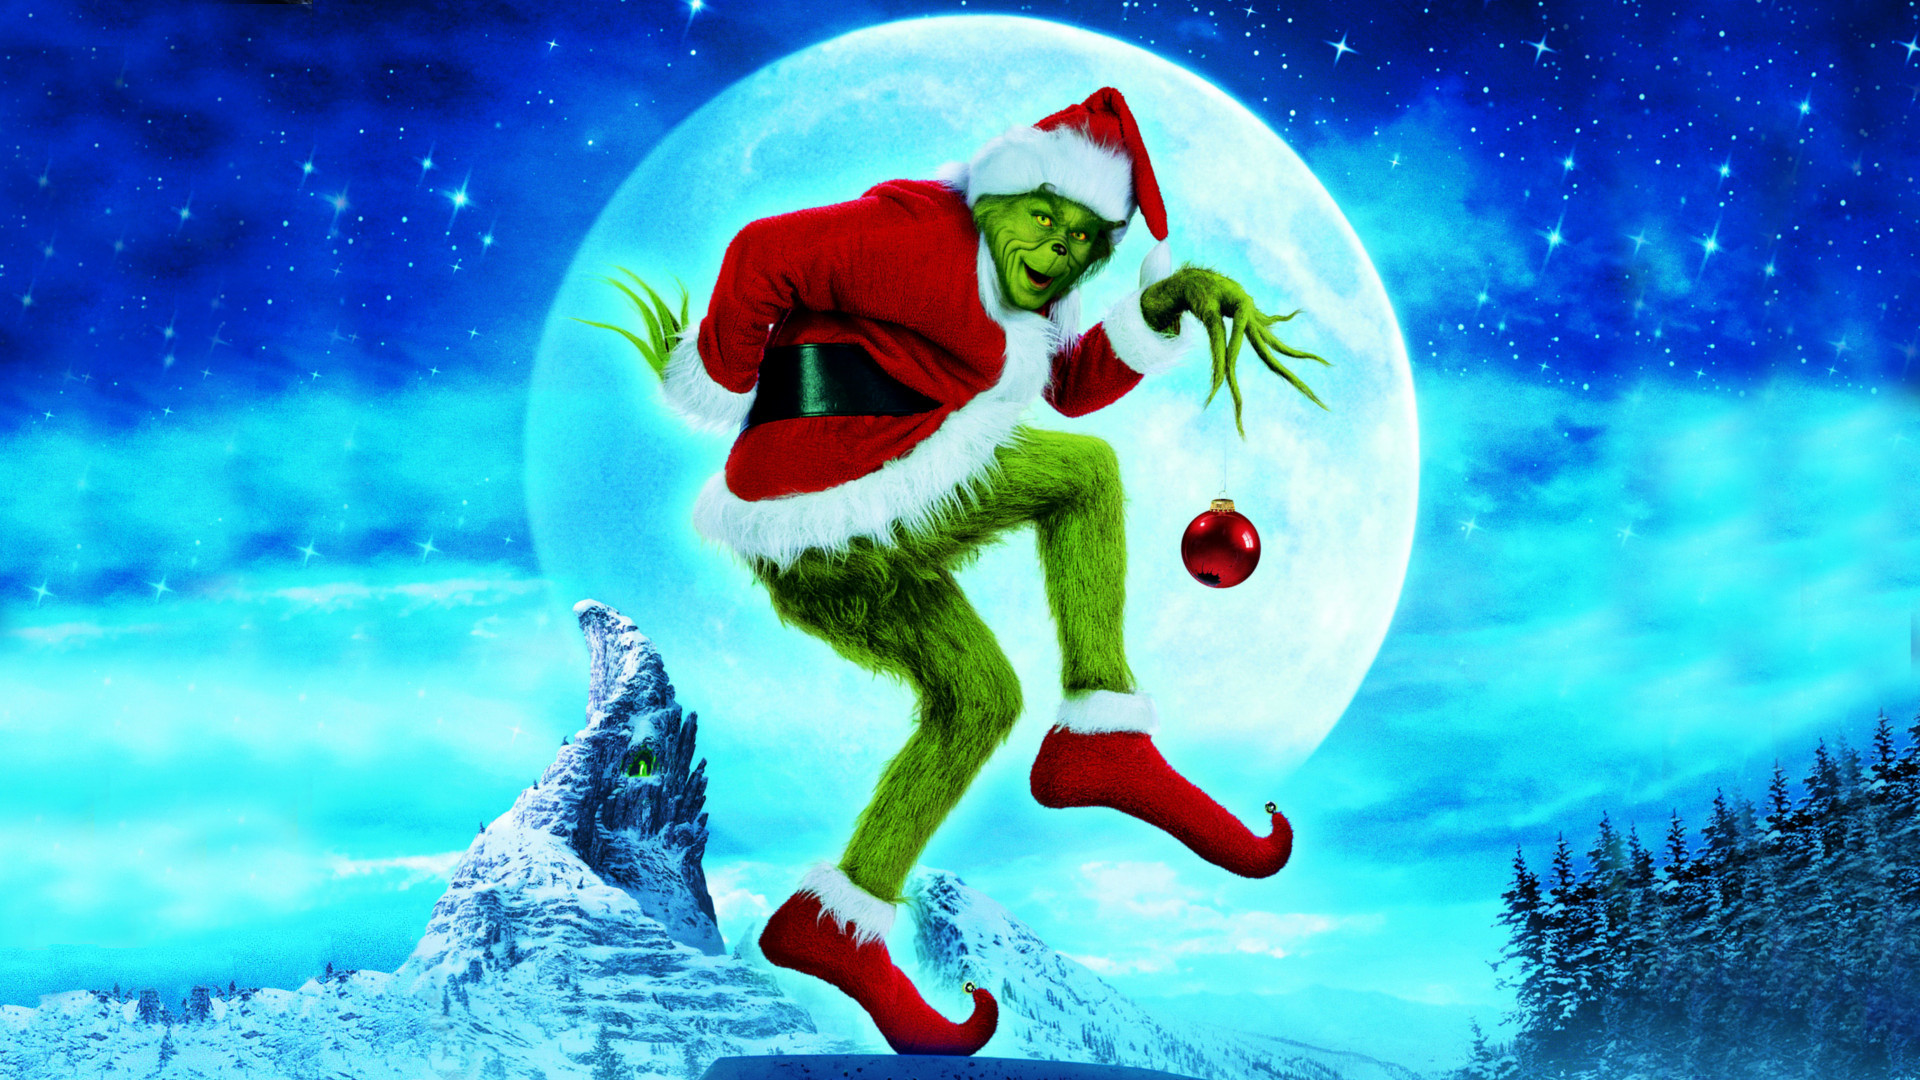 1920x1080 How the Grinch Stole Christmas HD Wallpaper | Background Image |   | ID:804156 - Wallpaper Abyss